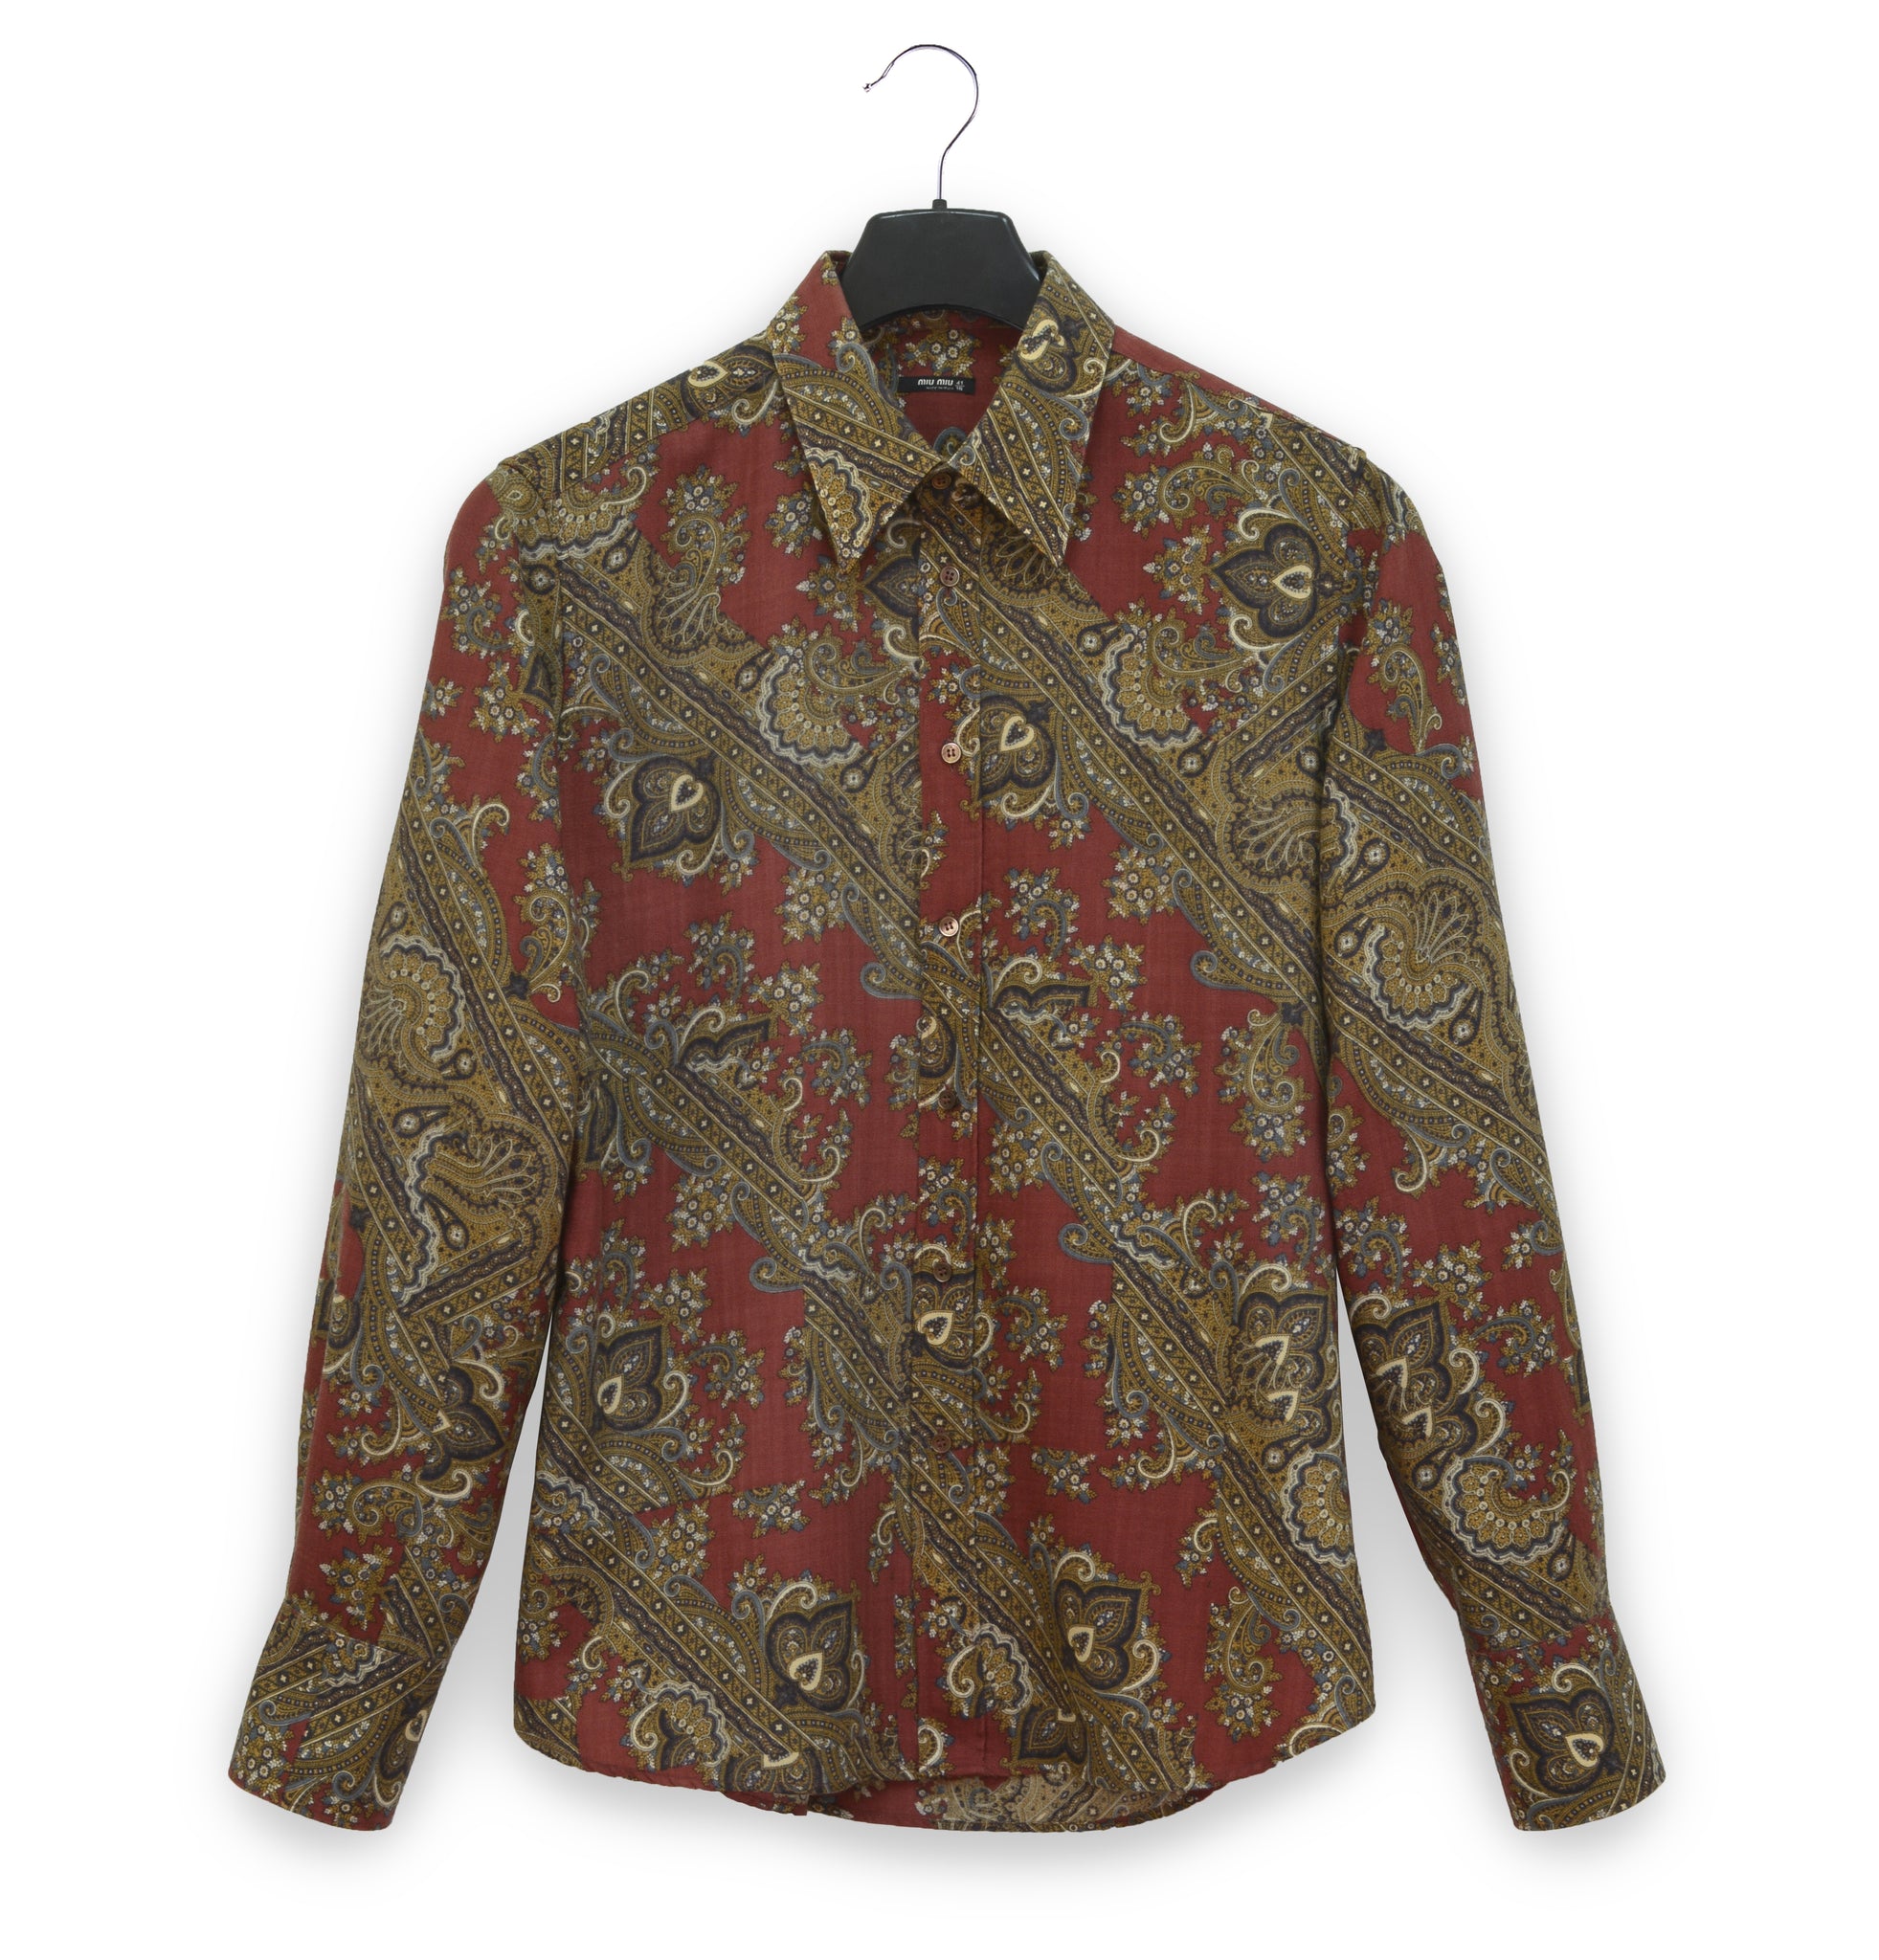 2005 Fitted Shirt in Virgin Wool Twill with Diagonal Paisley Print